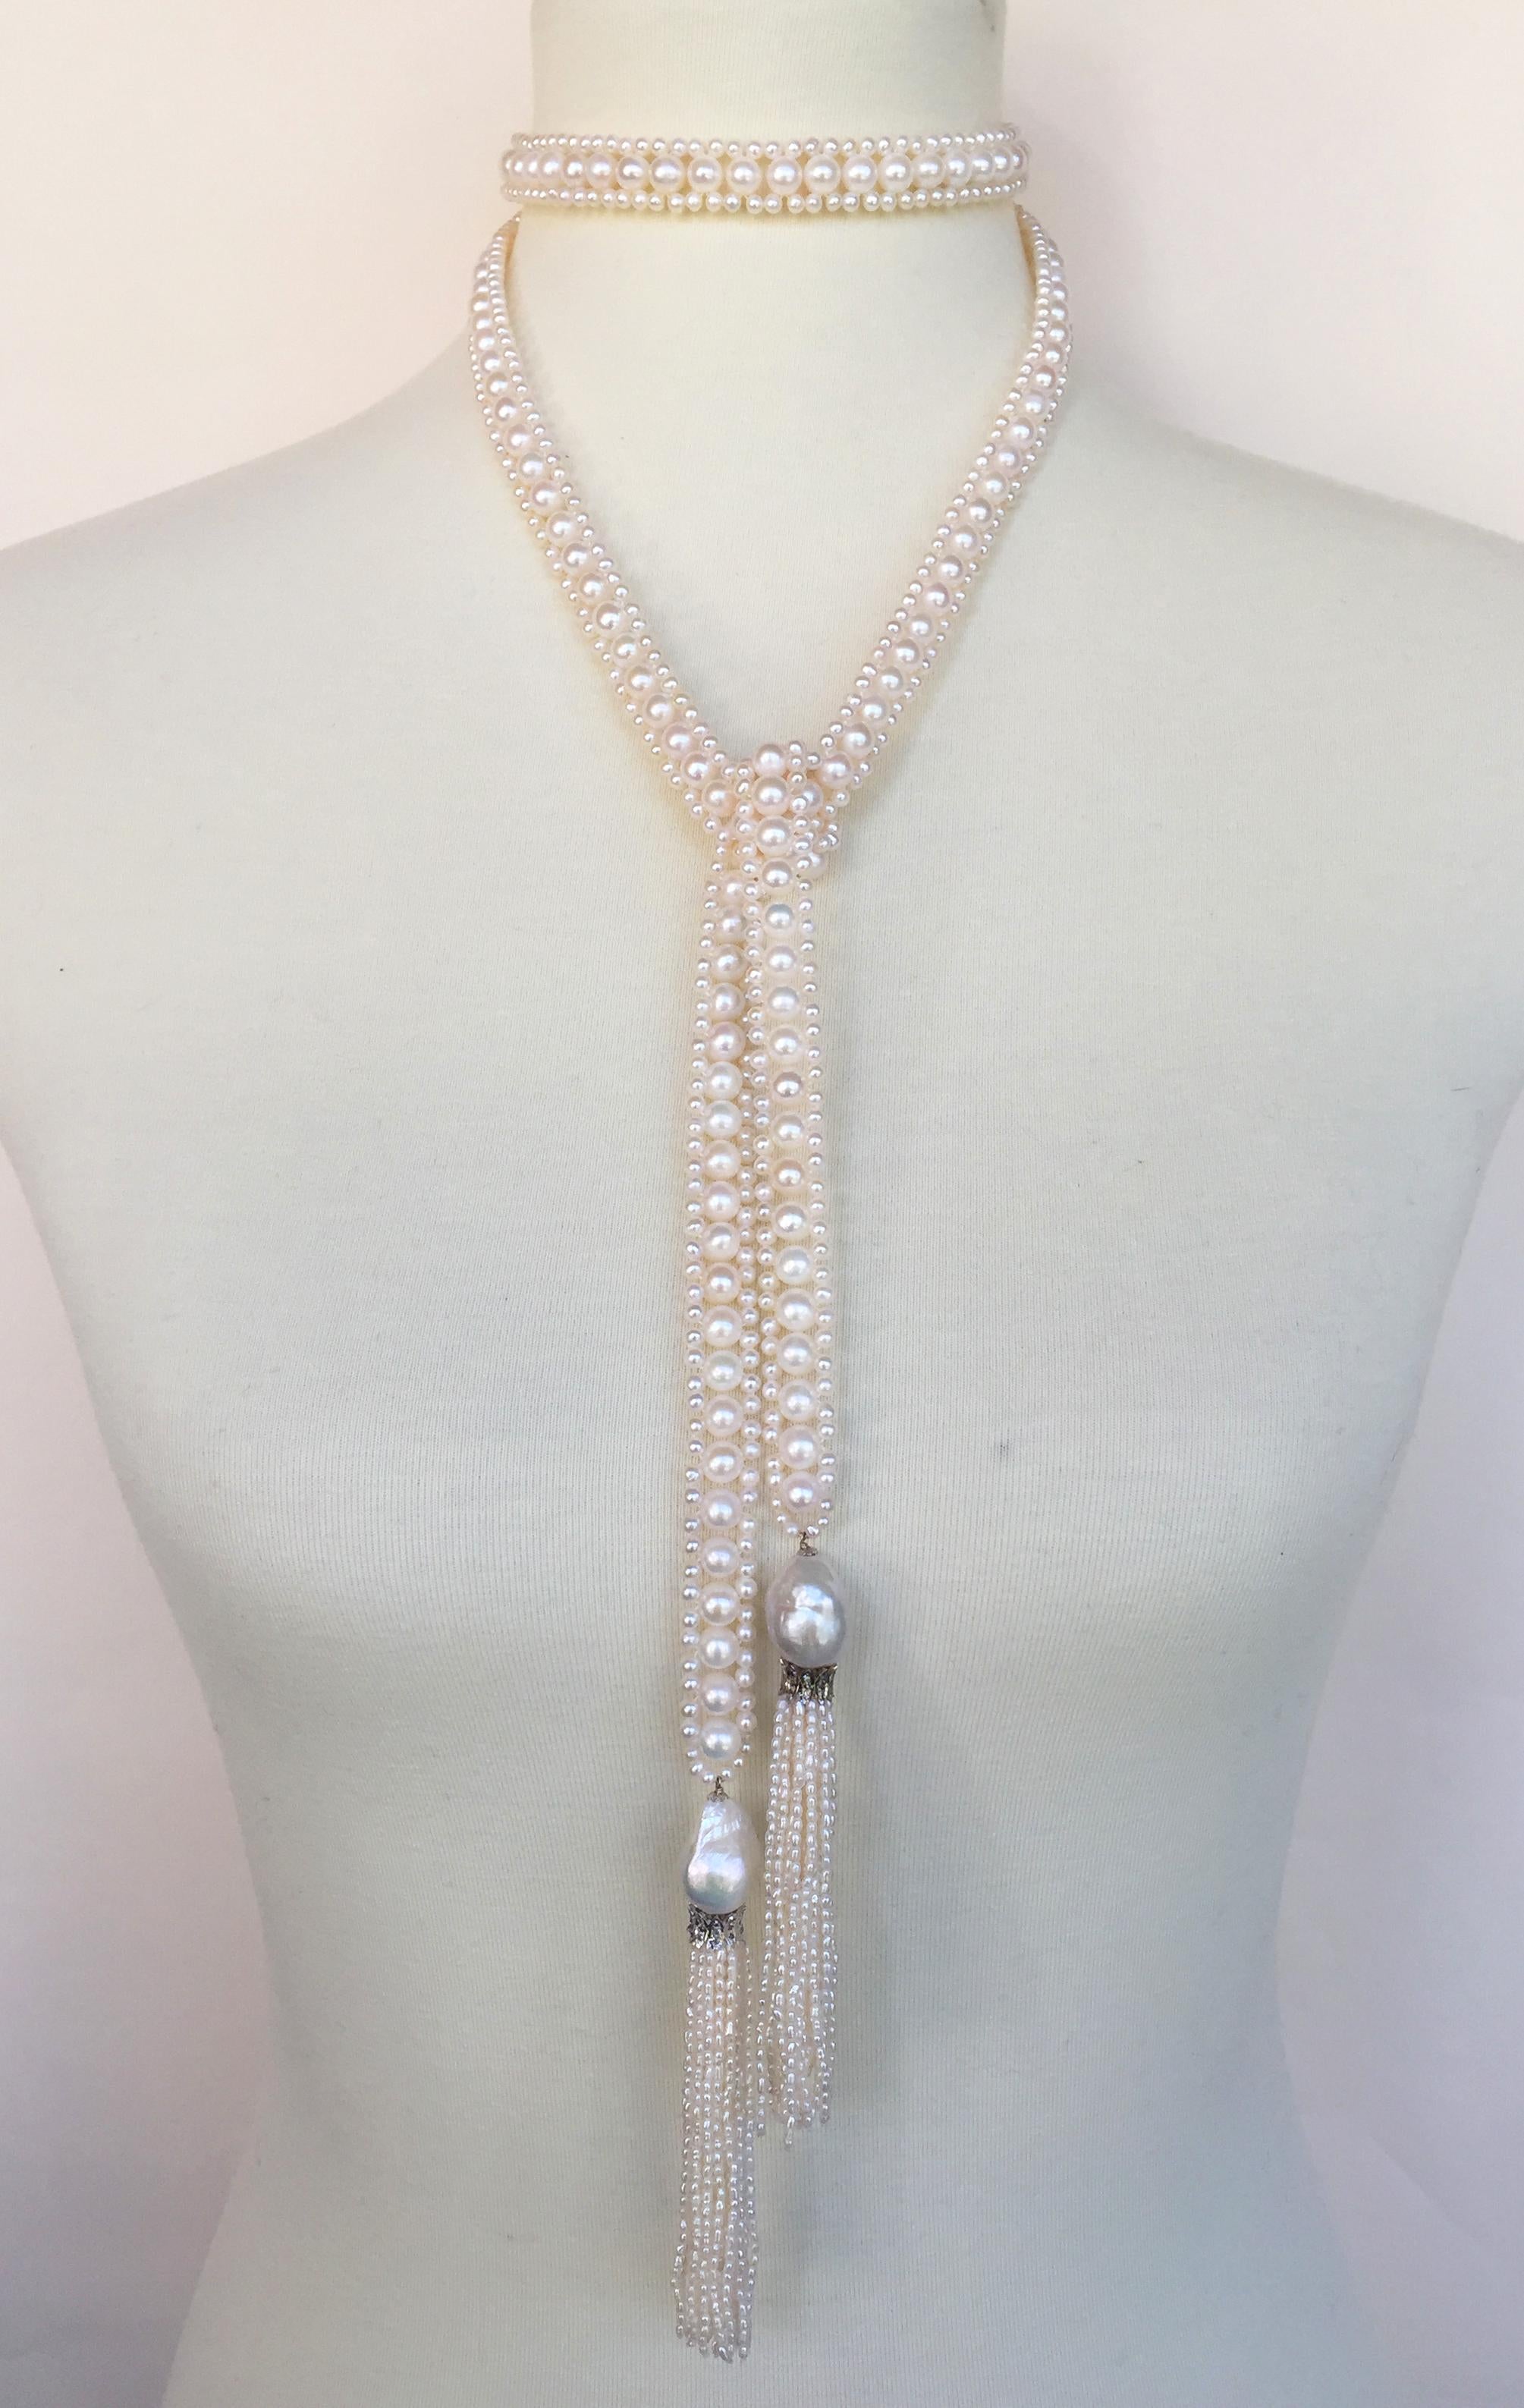 This white pearl rope long sautoir necklace with white pearl tassels and diamond roundels is the essence of classic elegance. Handcrafted by Marina J. each pearl was chosen for its beautiful shape and glowing white color. The rope like design is